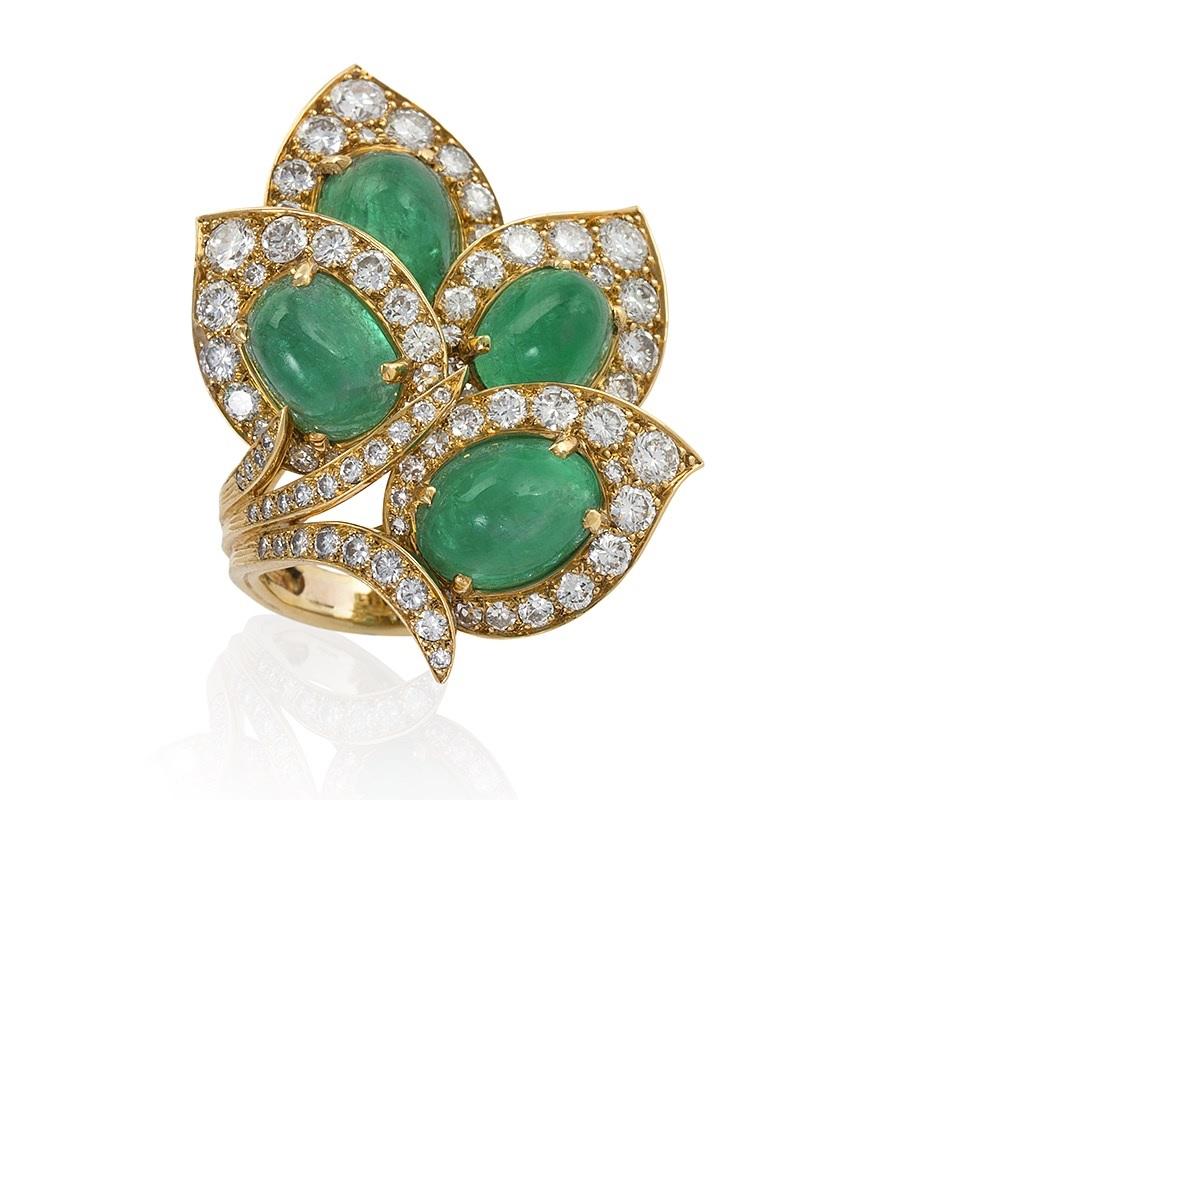 A French Mid-20th Century 18 karat gold ring with diamonds and emeralds by Marchak. The leaves of this ring are framed with 81 round-cut diamonds with an approximate total weight of 5.10 carats with a VS clarity and G/H color grade. The leaves